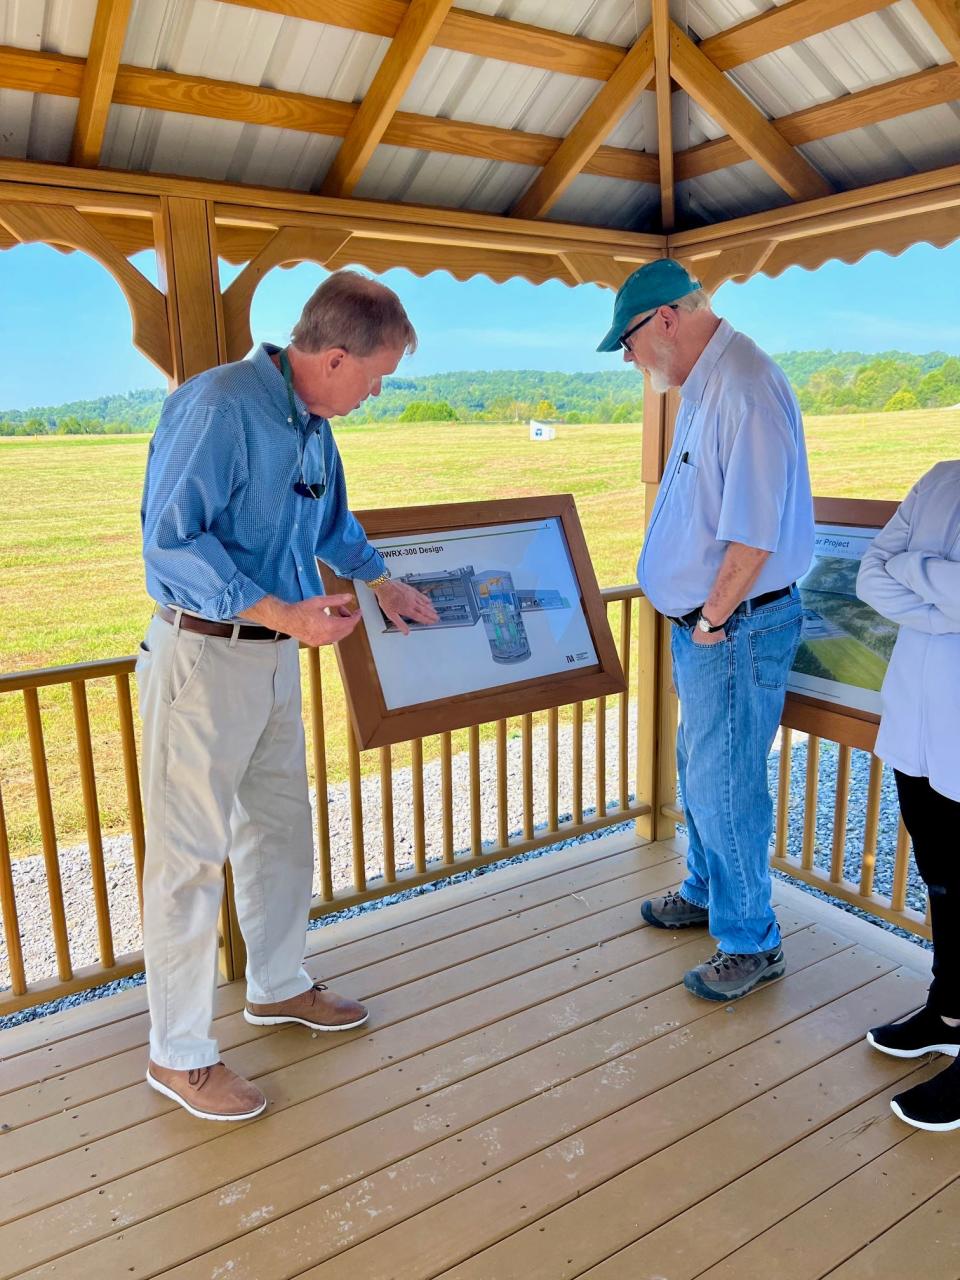 TVA Senior Vice President Bob Deacy, left, walks the delegation through a description of the Clinch River Nuclear Site and the small modular reactor proposal as Anderson County Commissioner Stephen Verran looks on.